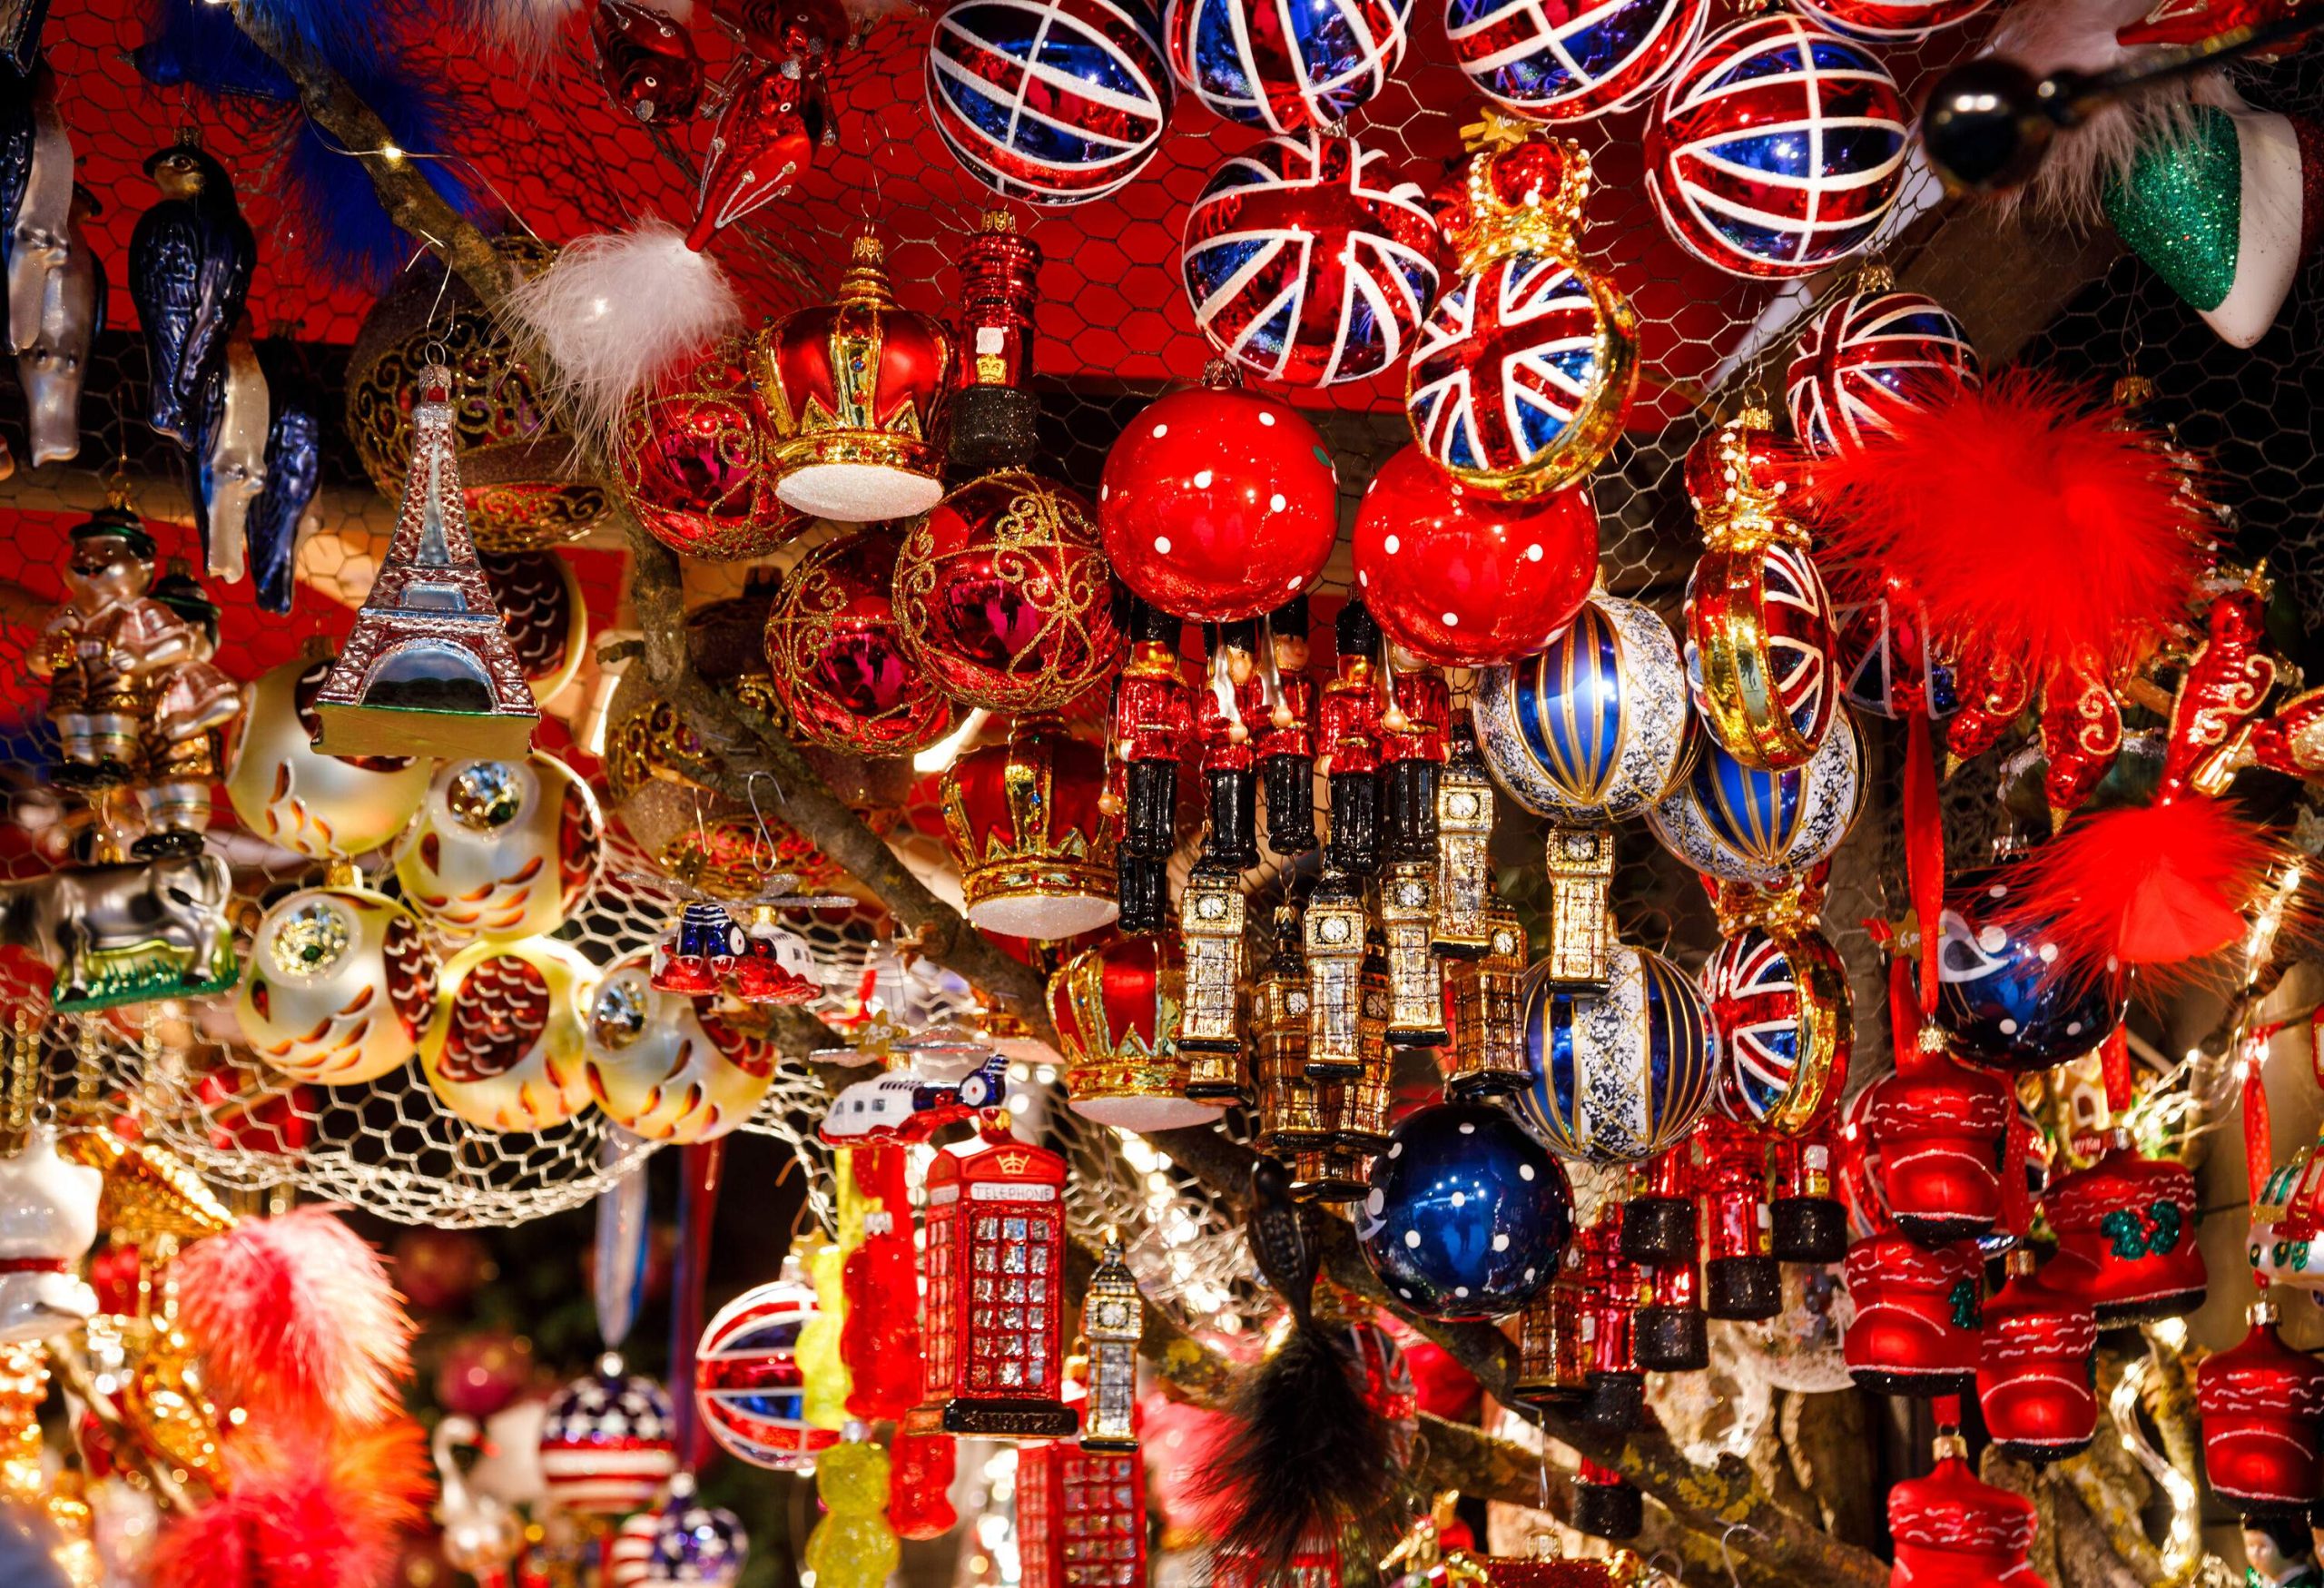 British themed glass Christmas tree decorations for sale at Christmas market.